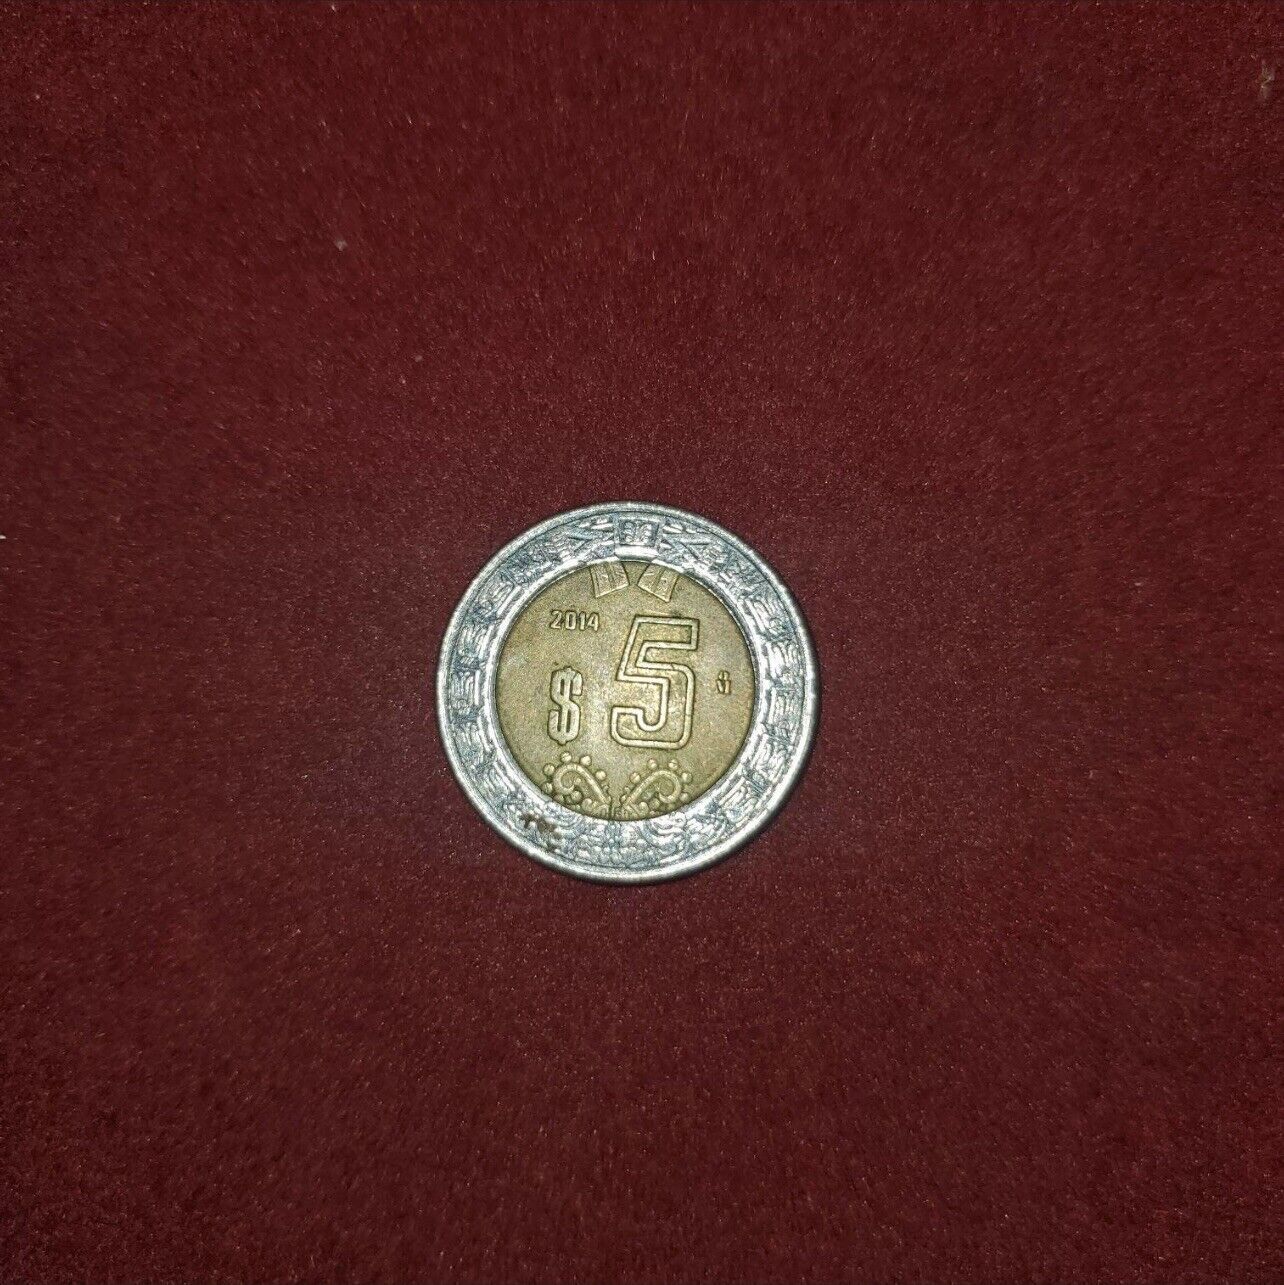 Extremely Potent 1000x Money Magnt Coin Super Djinn charged with infinite Wealth